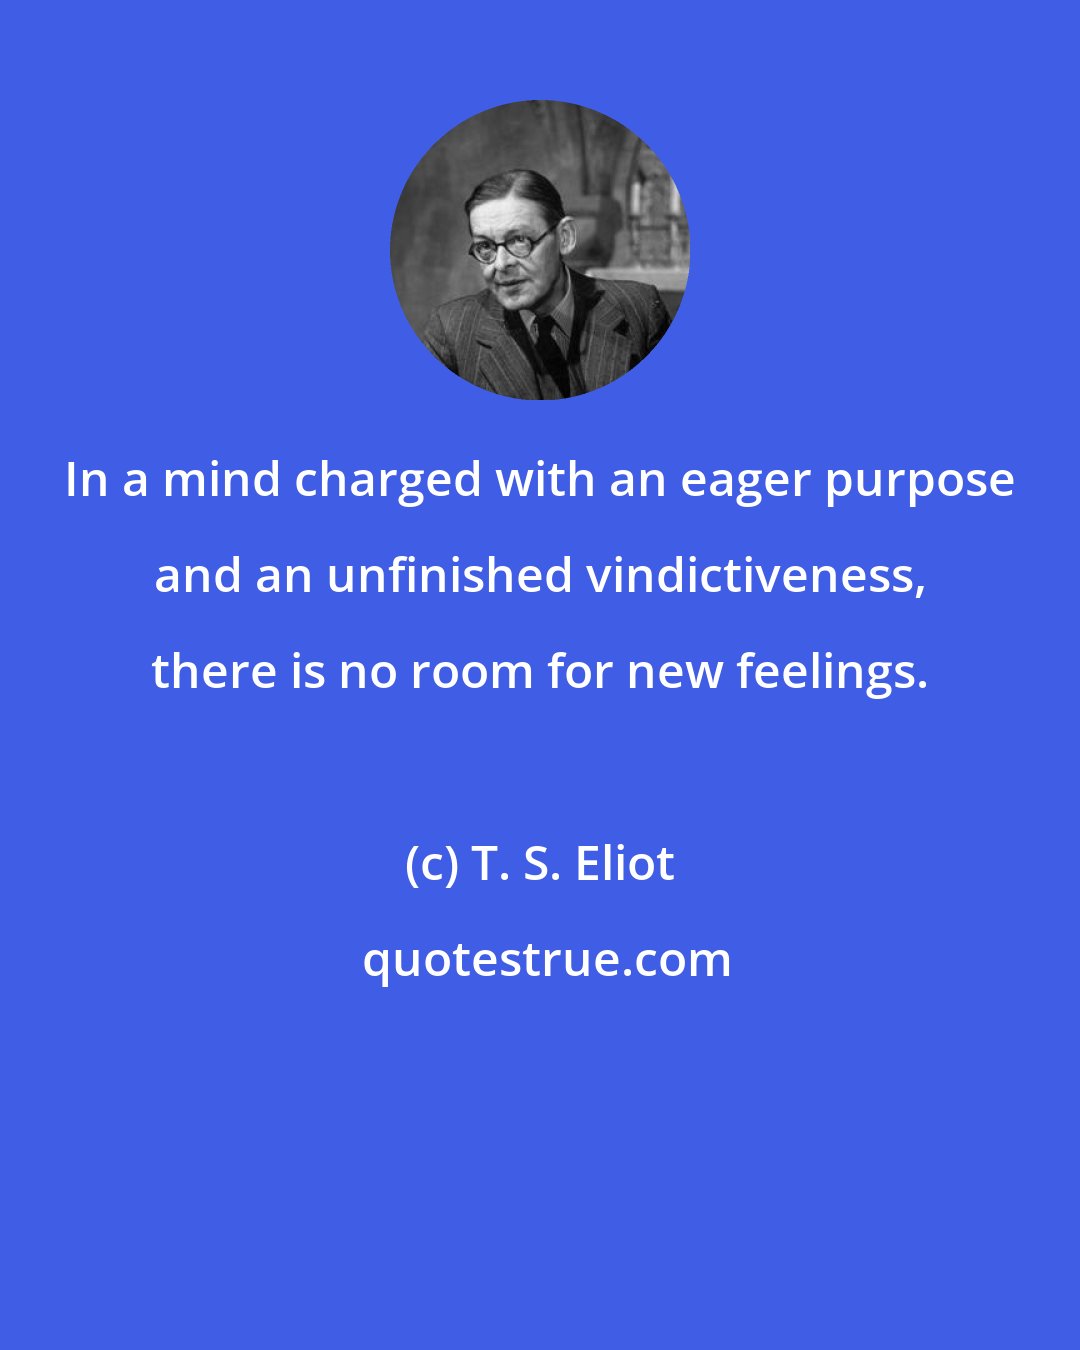 T. S. Eliot: In a mind charged with an eager purpose and an unfinished vindictiveness, there is no room for new feelings.